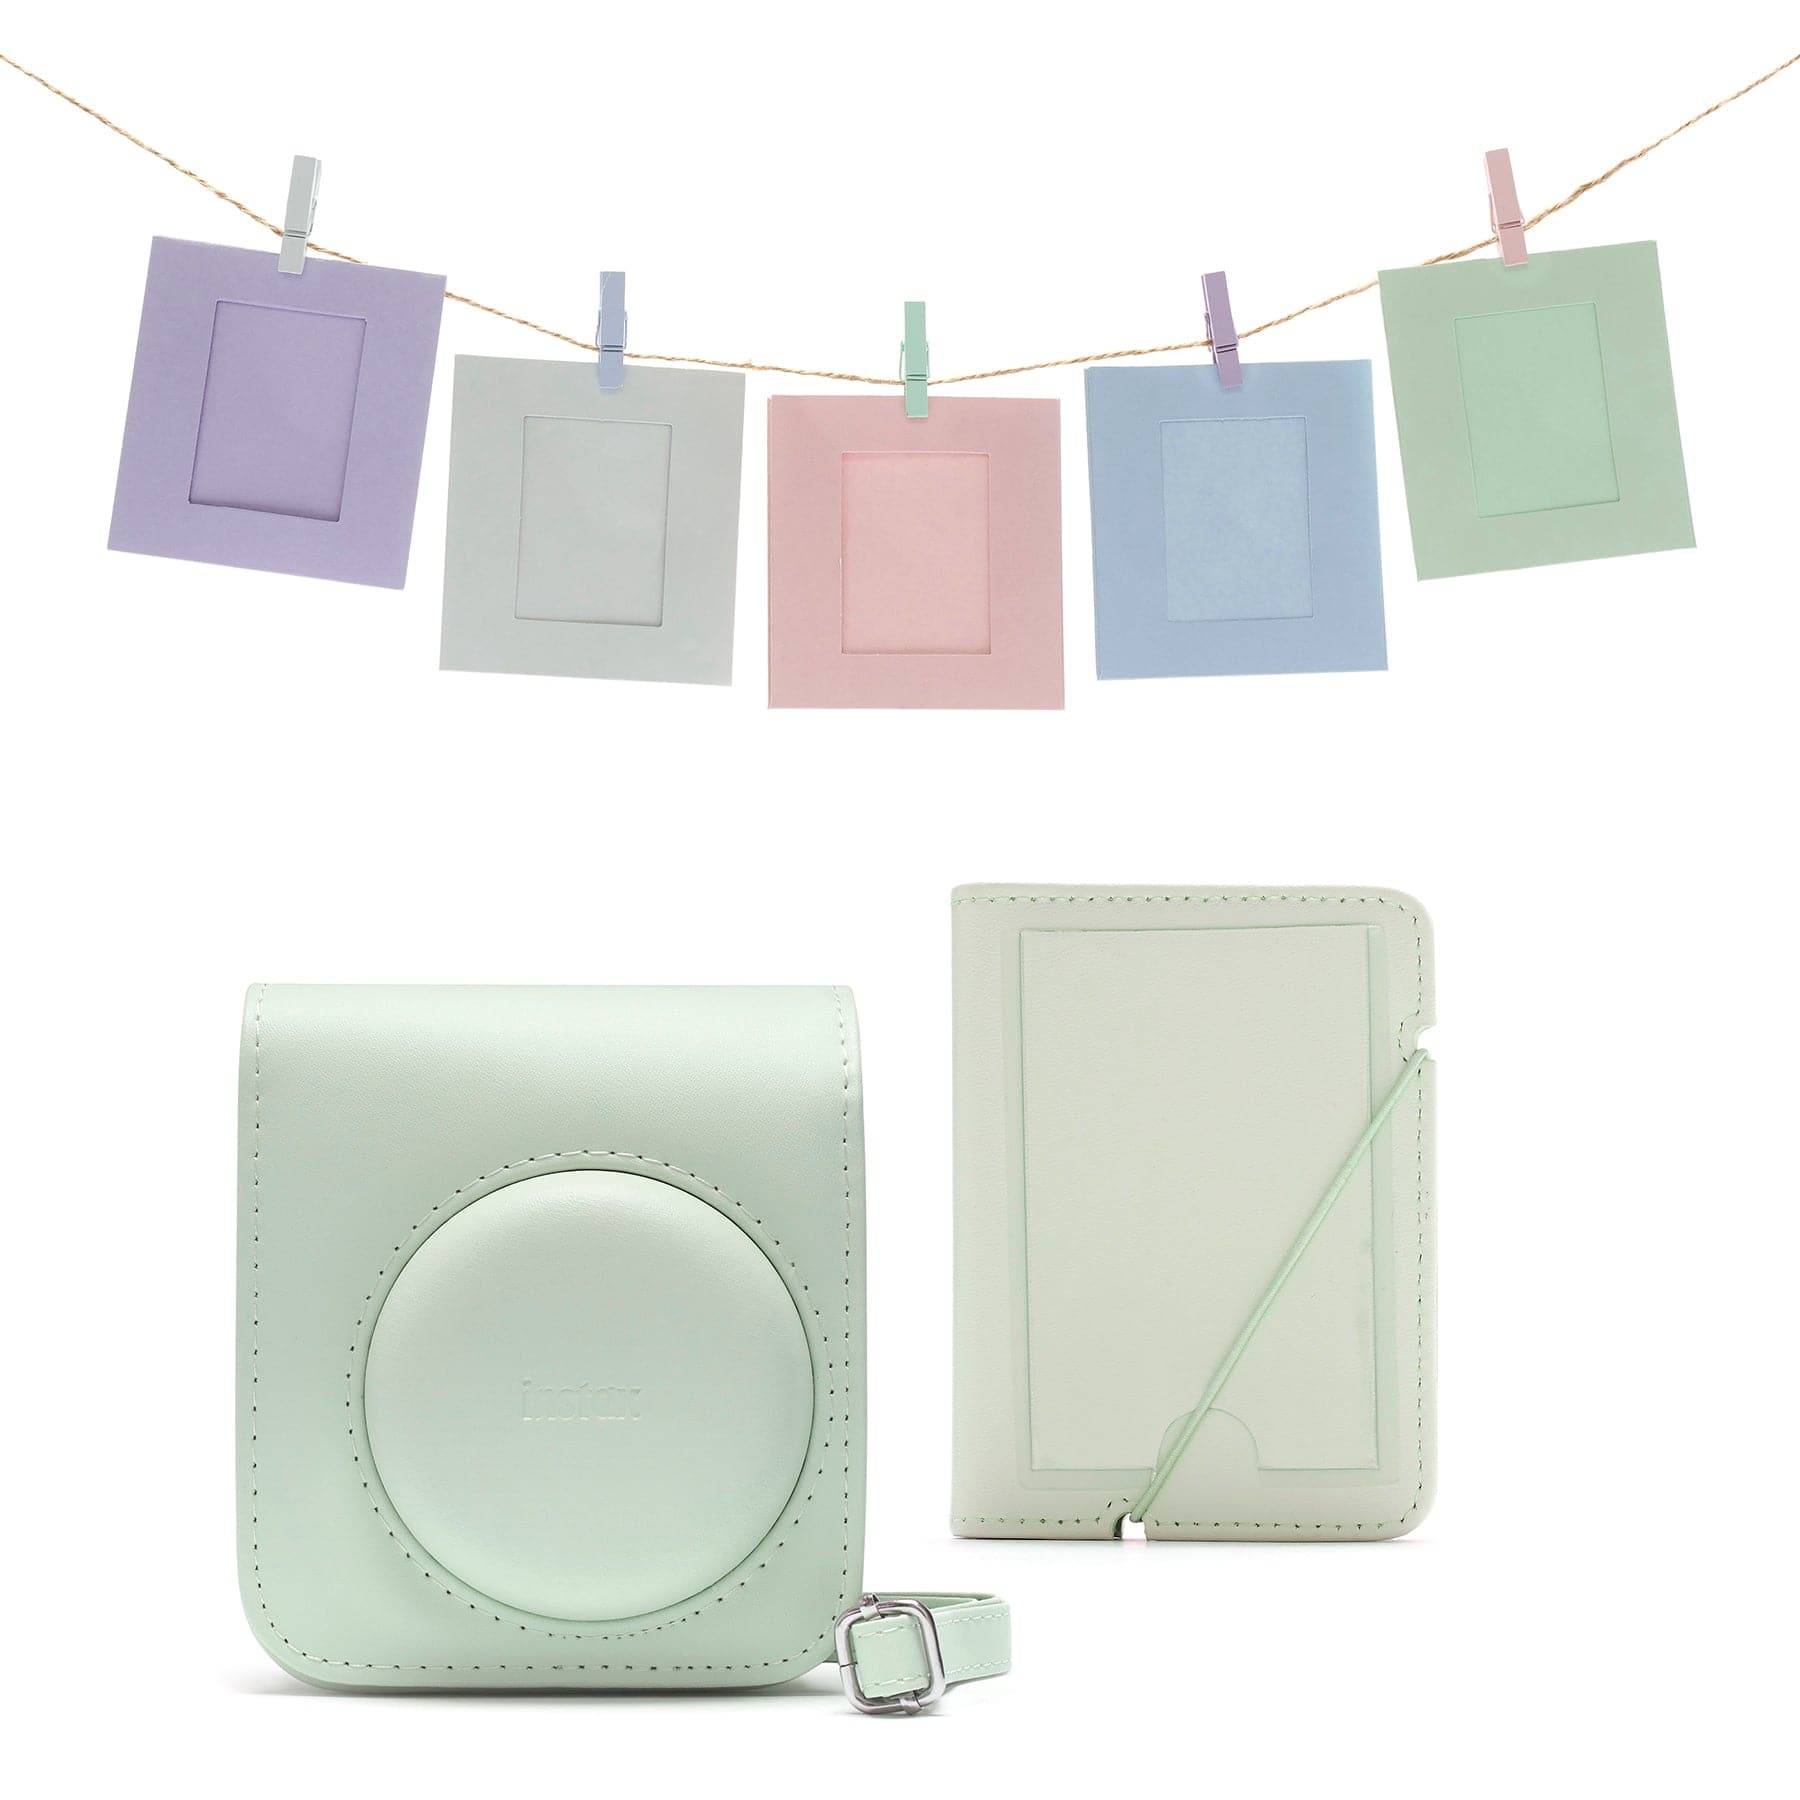 Fujifilm Instax Mini 12 Accessory Kit with Case, Photo Album, Hanging Cards & Pegs (Green)